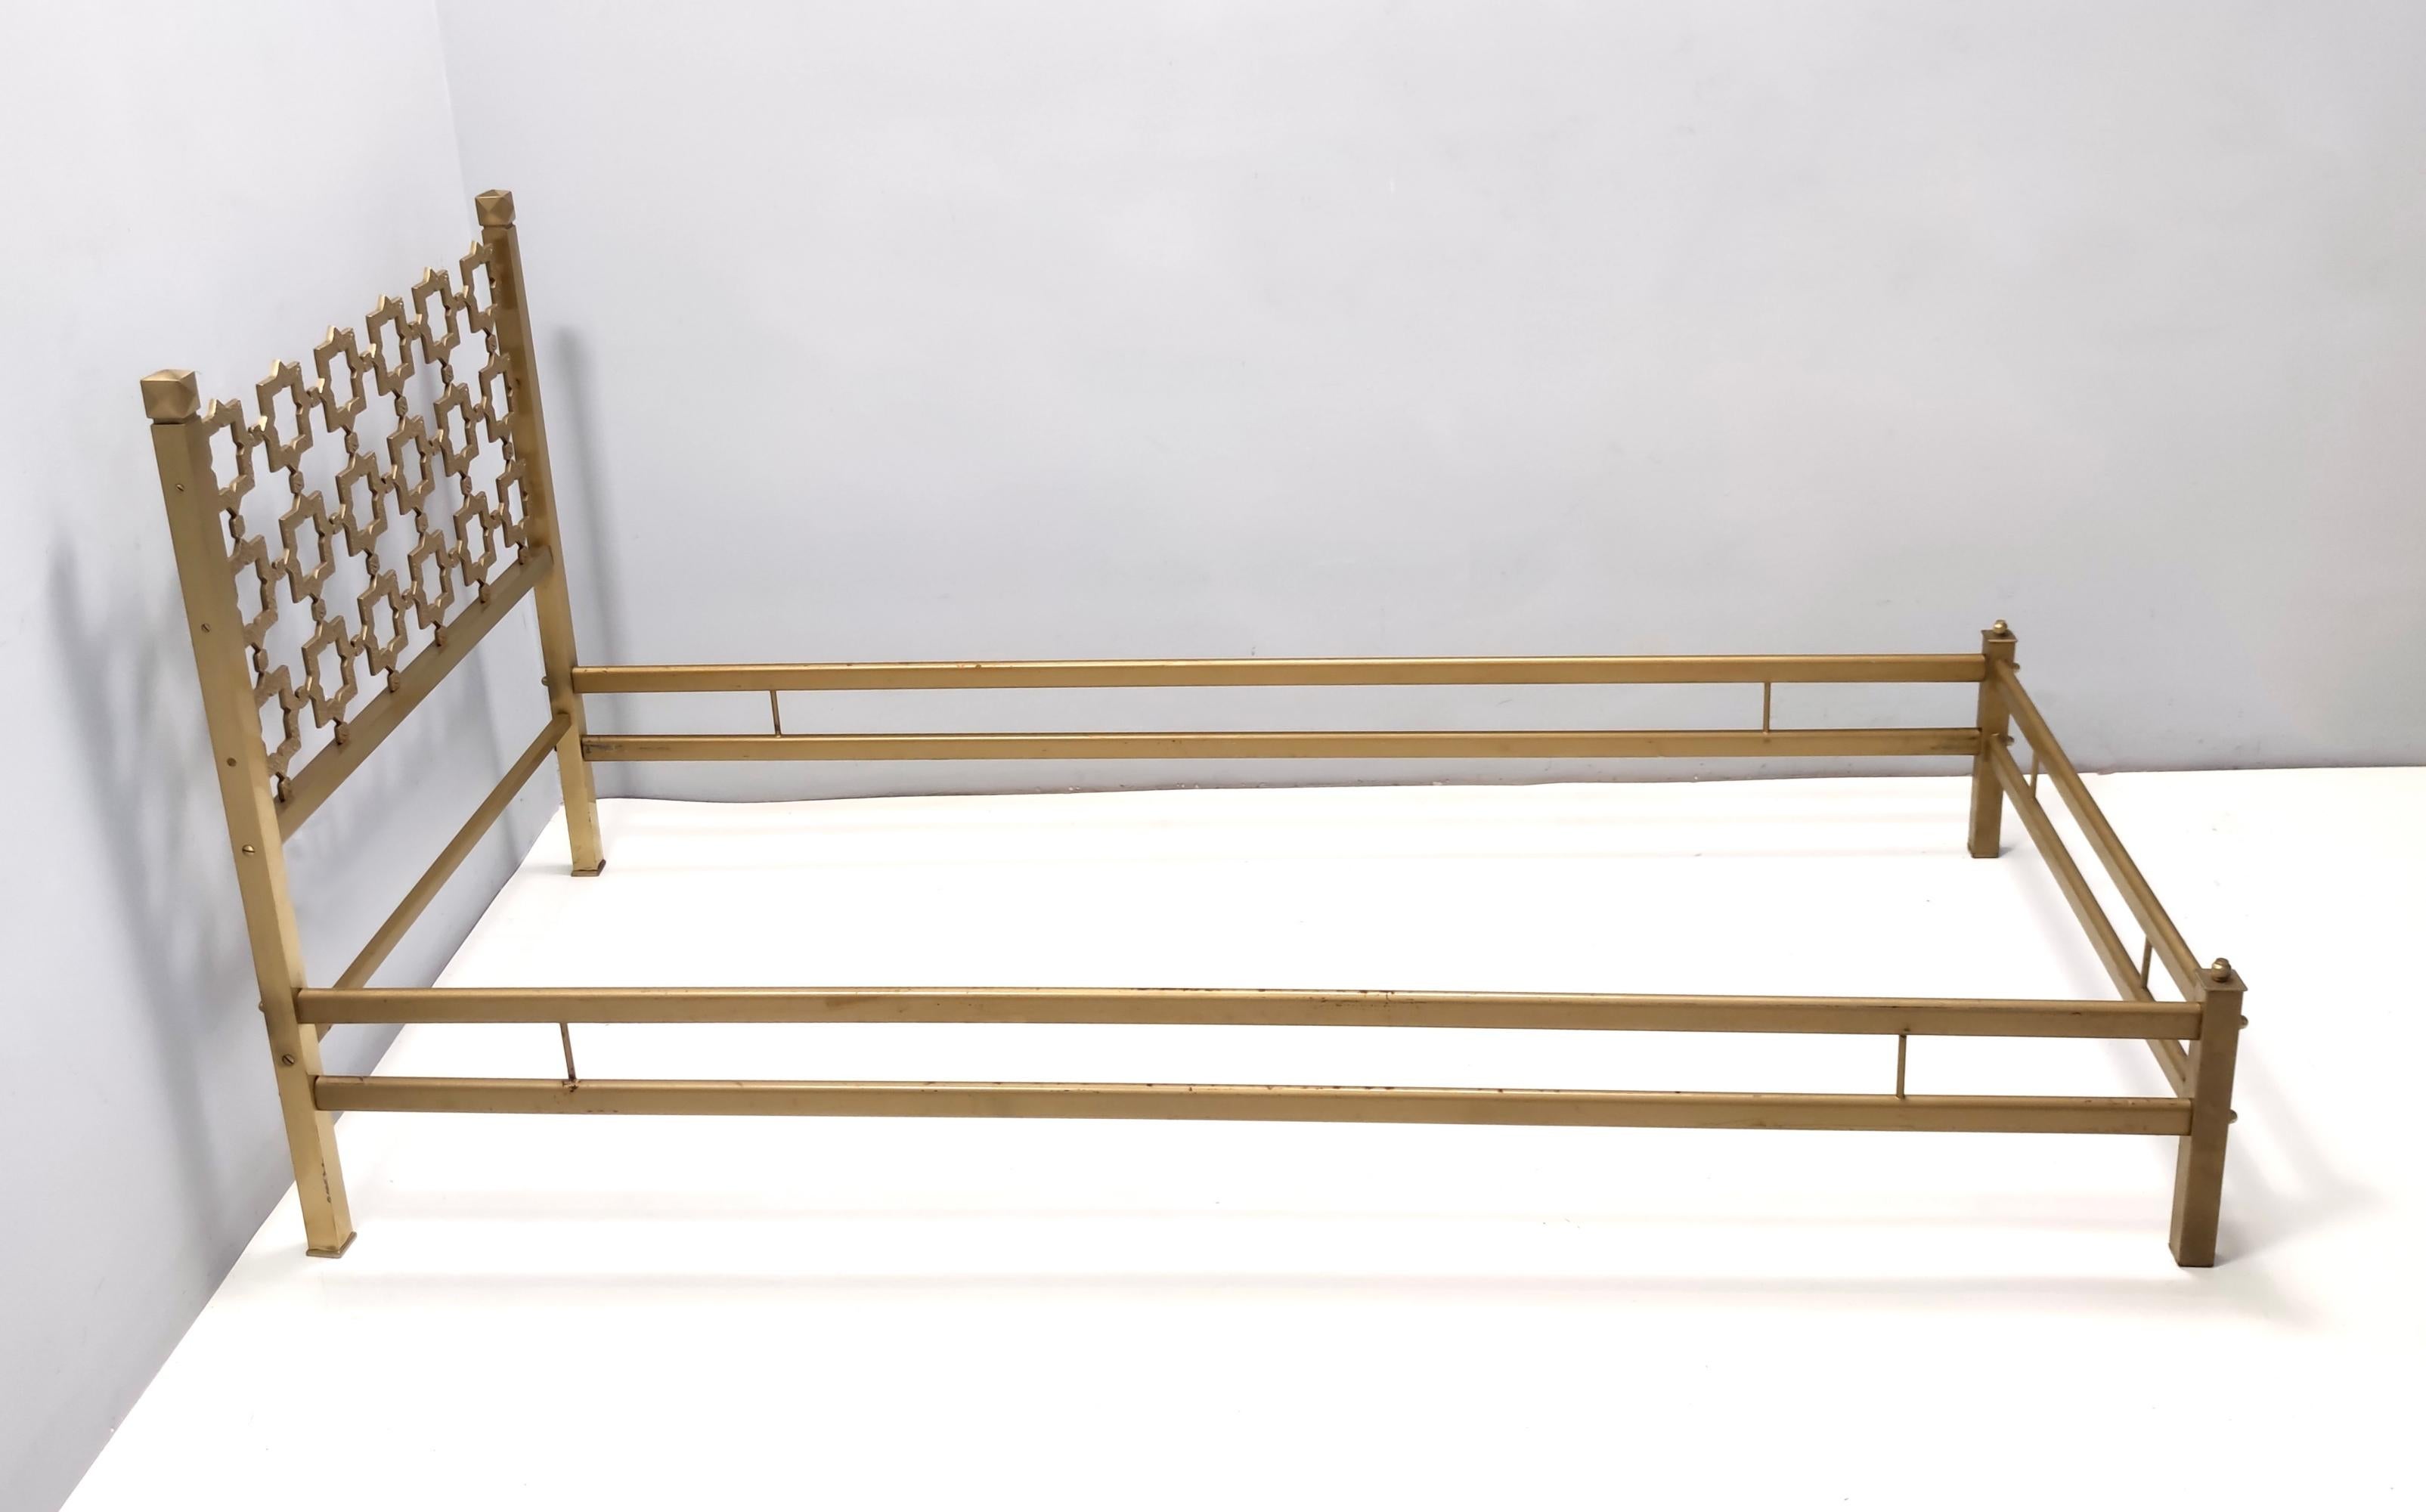 Made in Italy, 1970s - 1980s.
This is a beautiful sculptural single bed in a classical style by Luciano Frigerio.
It features a brass headboard with a an artistic handmade cast brass star-pattern.
The lateral parts and the footboard is in varnished